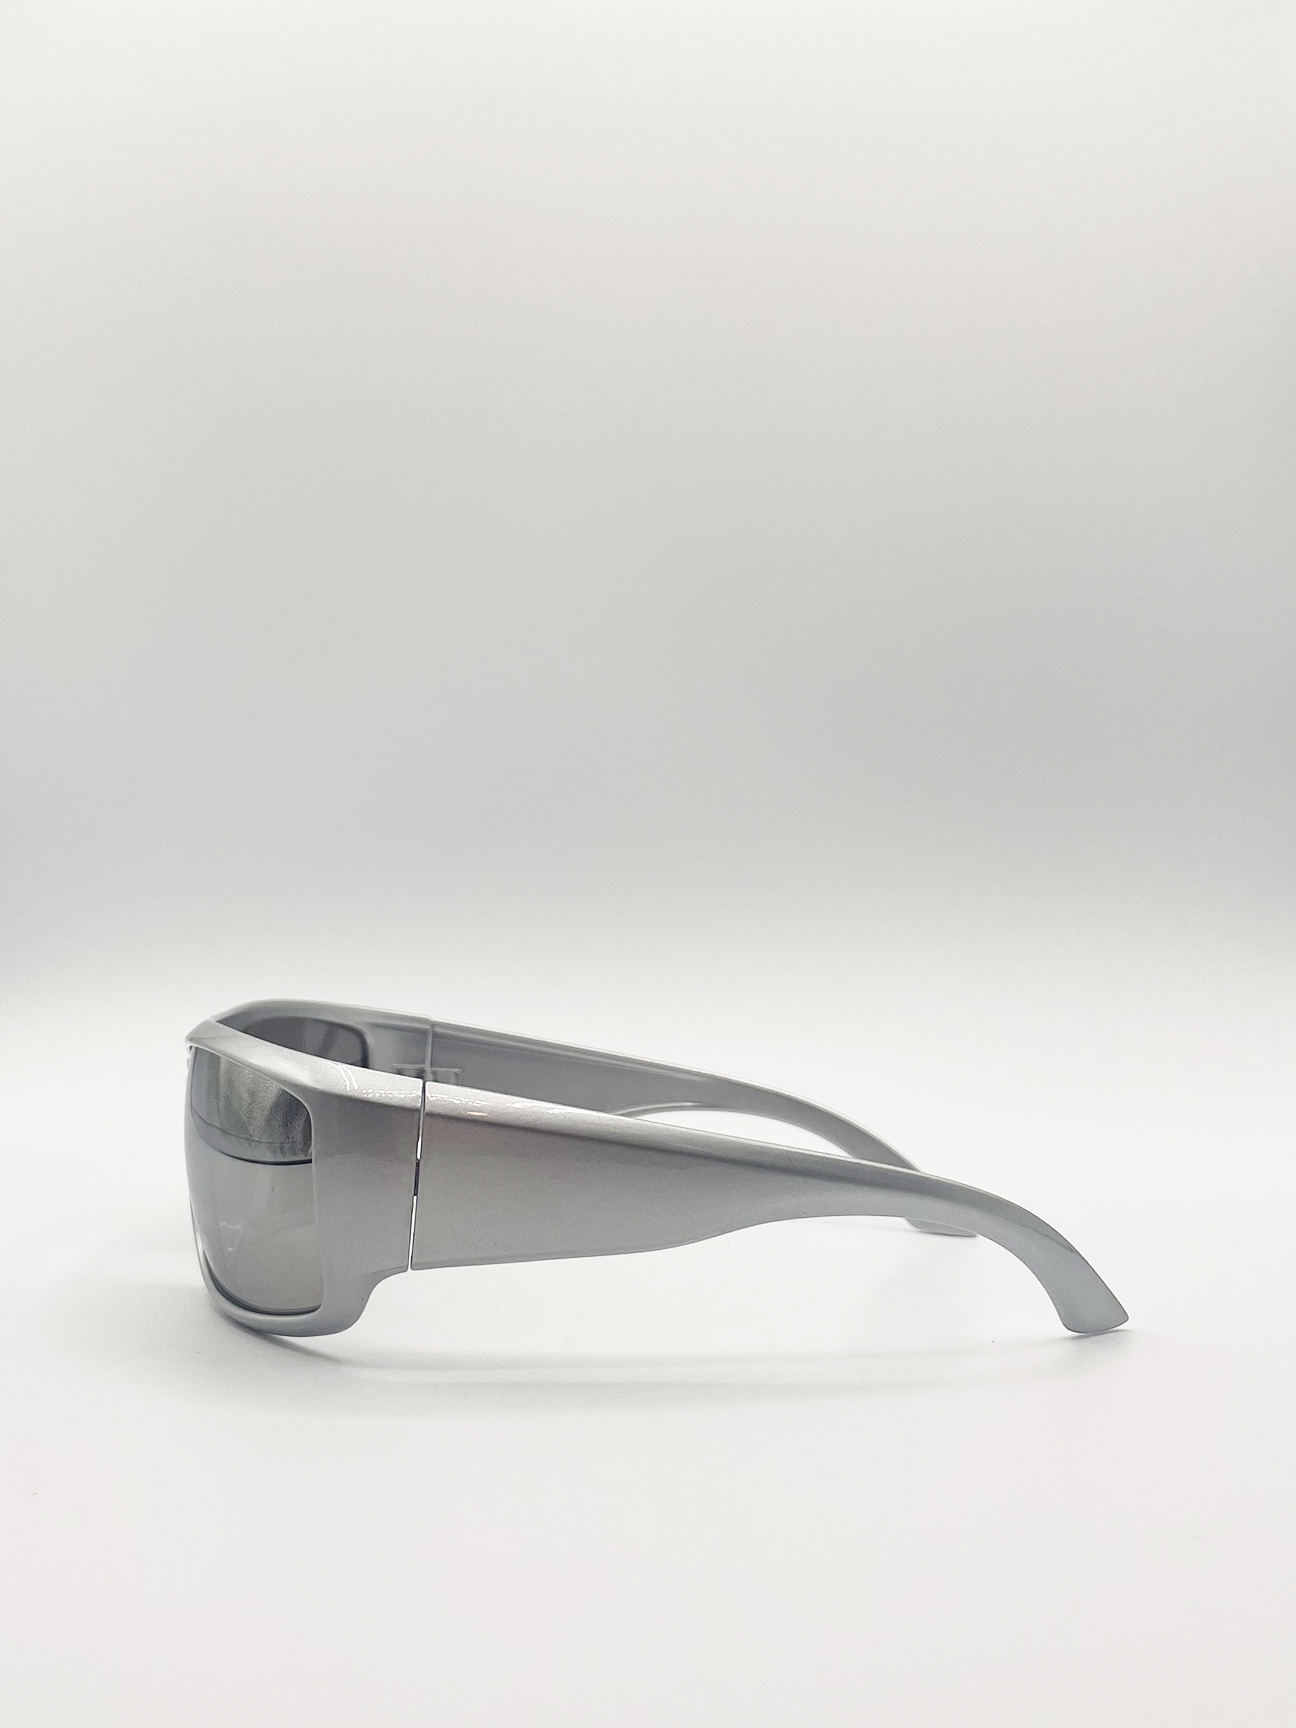 Silver Plastic Frame Racer Style sunglasses with Mirror Lenses